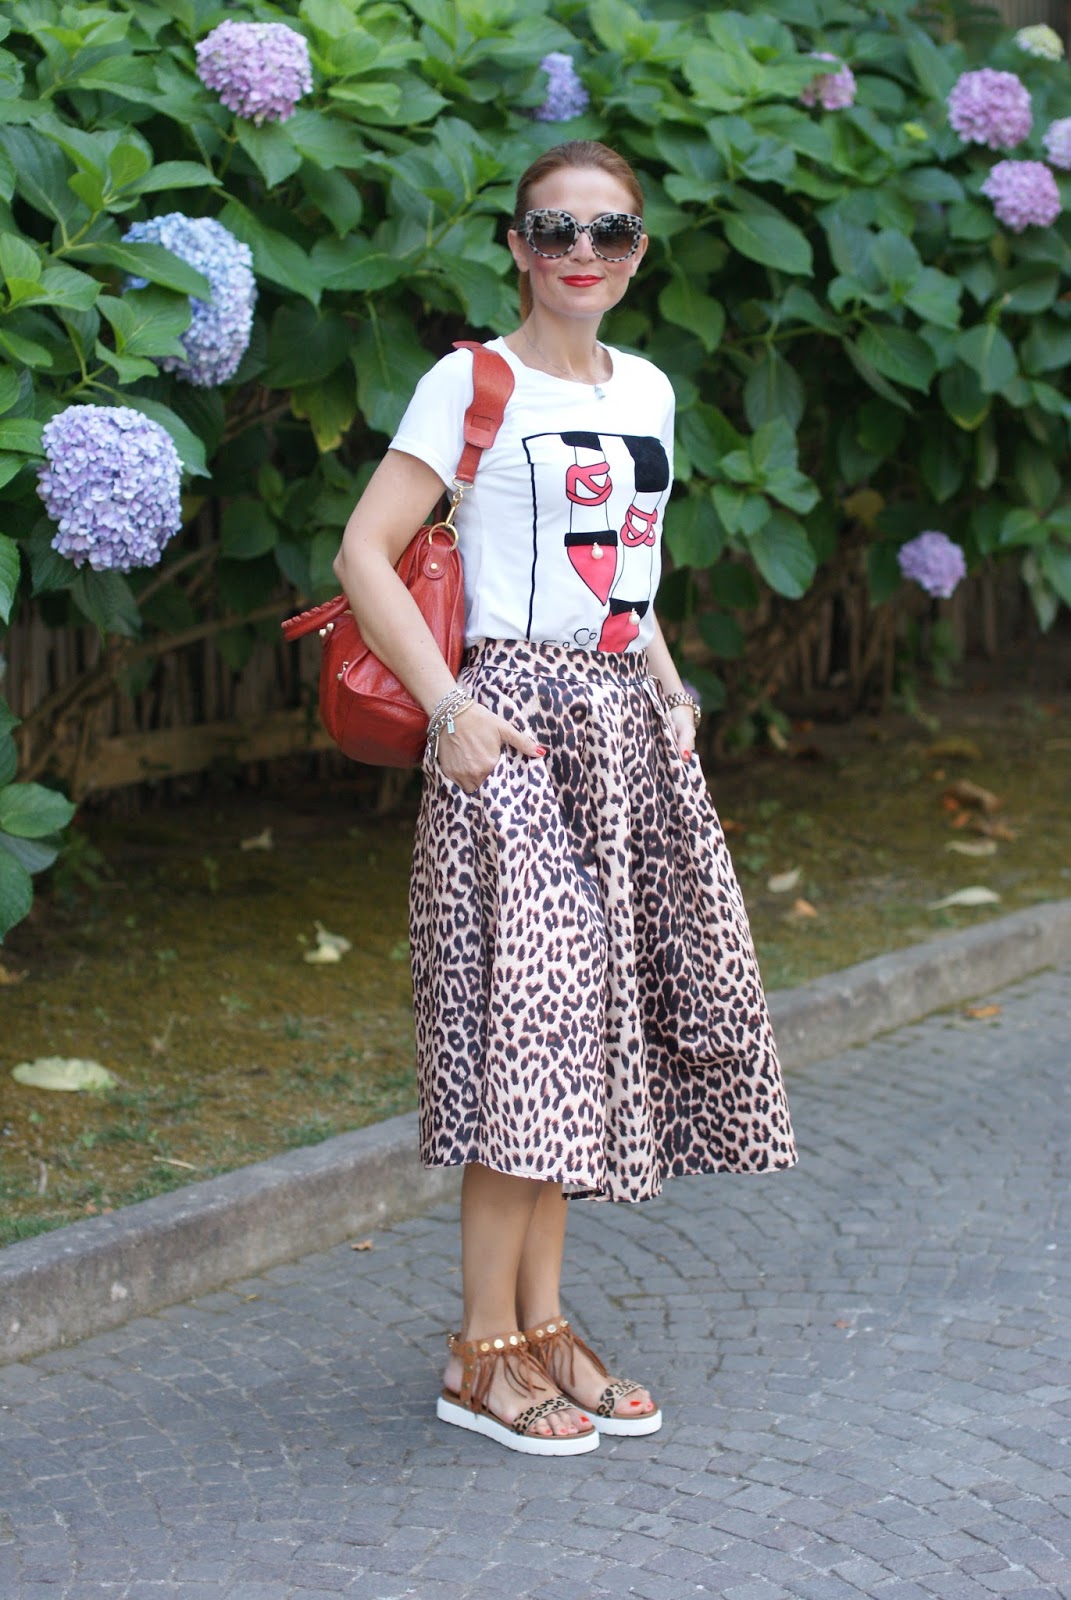 Leopard print is the new neutral with Dolce & Gabbana leopard sunglasses found on Giarre.com, leopard print midi skirt on Fashion and Cookies fashion blog, fashion blogger style